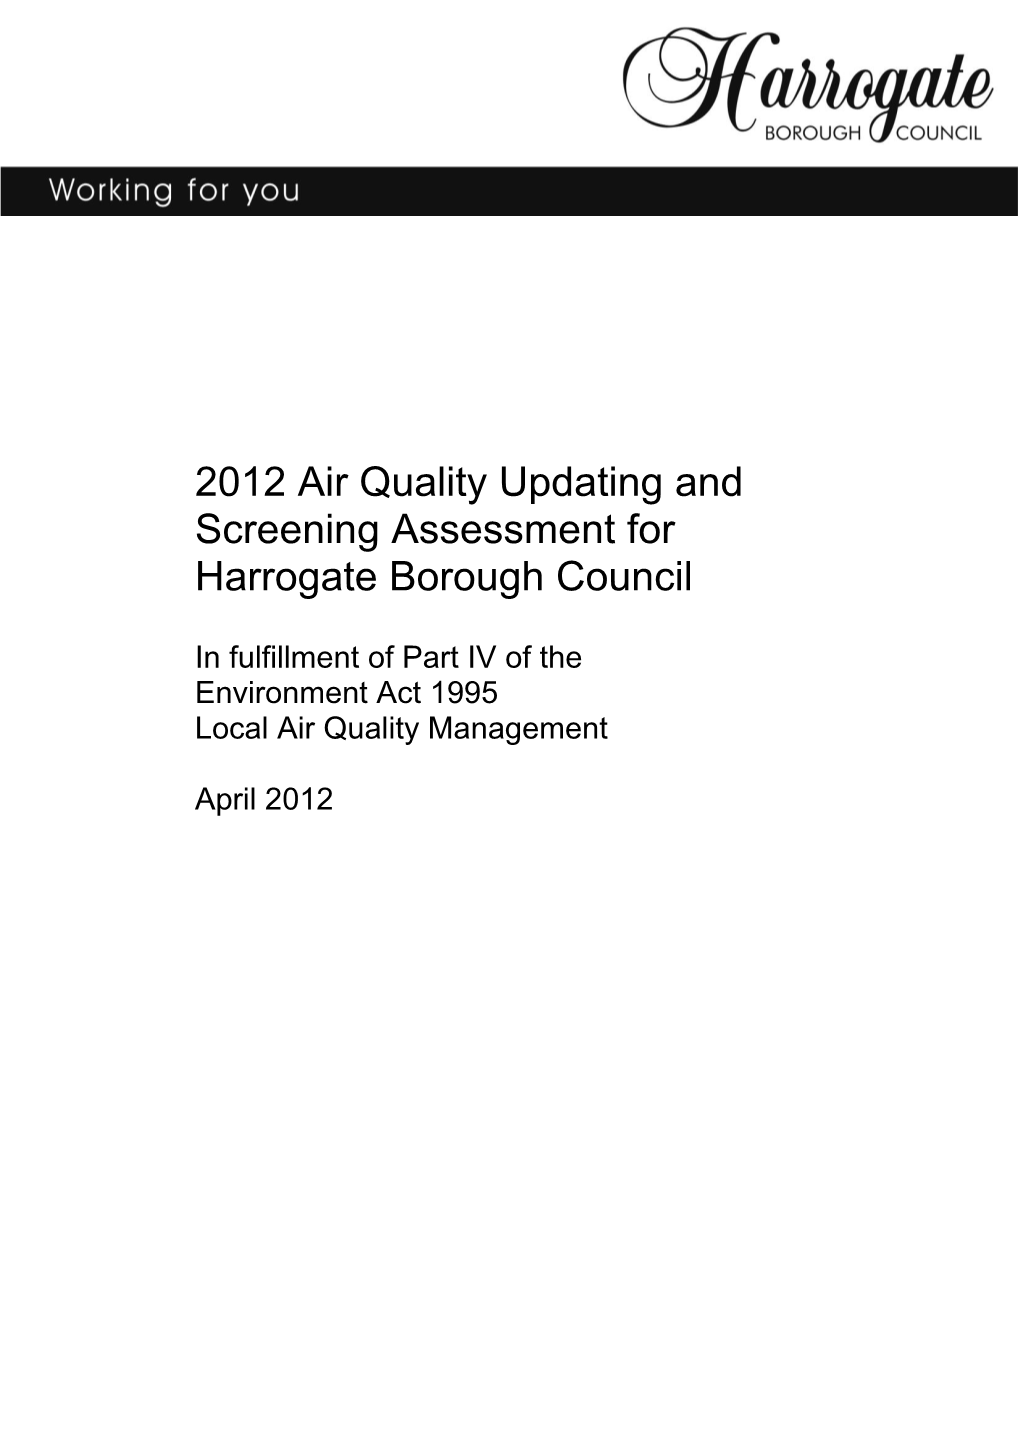 2012 Air Quality Updating and Screening Assessment for Harrogate Borough Council